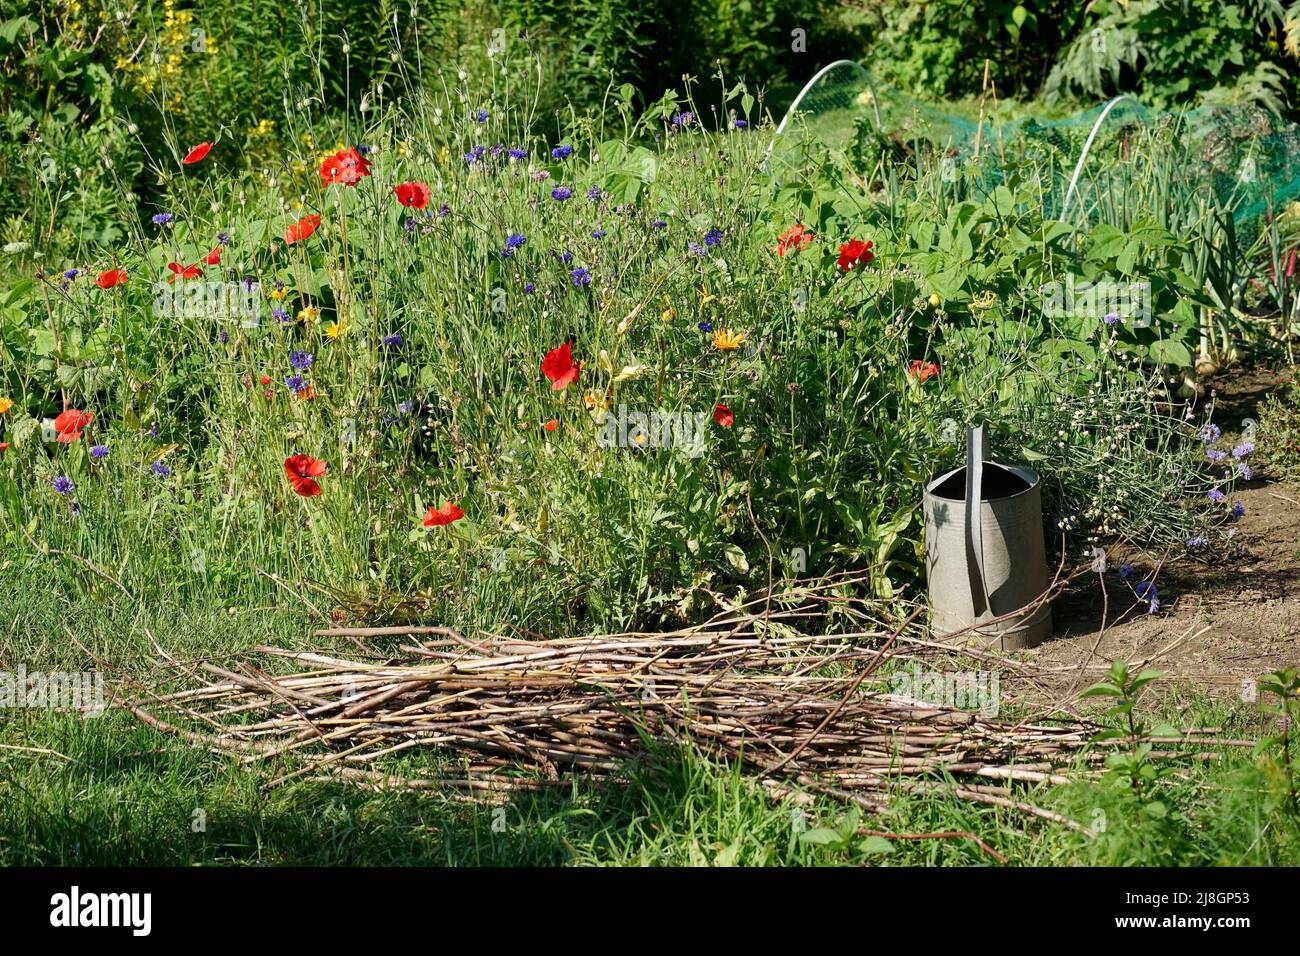 Vegetable garden in july with branches on the ground, a zinc watering can and flowers Stock Photo